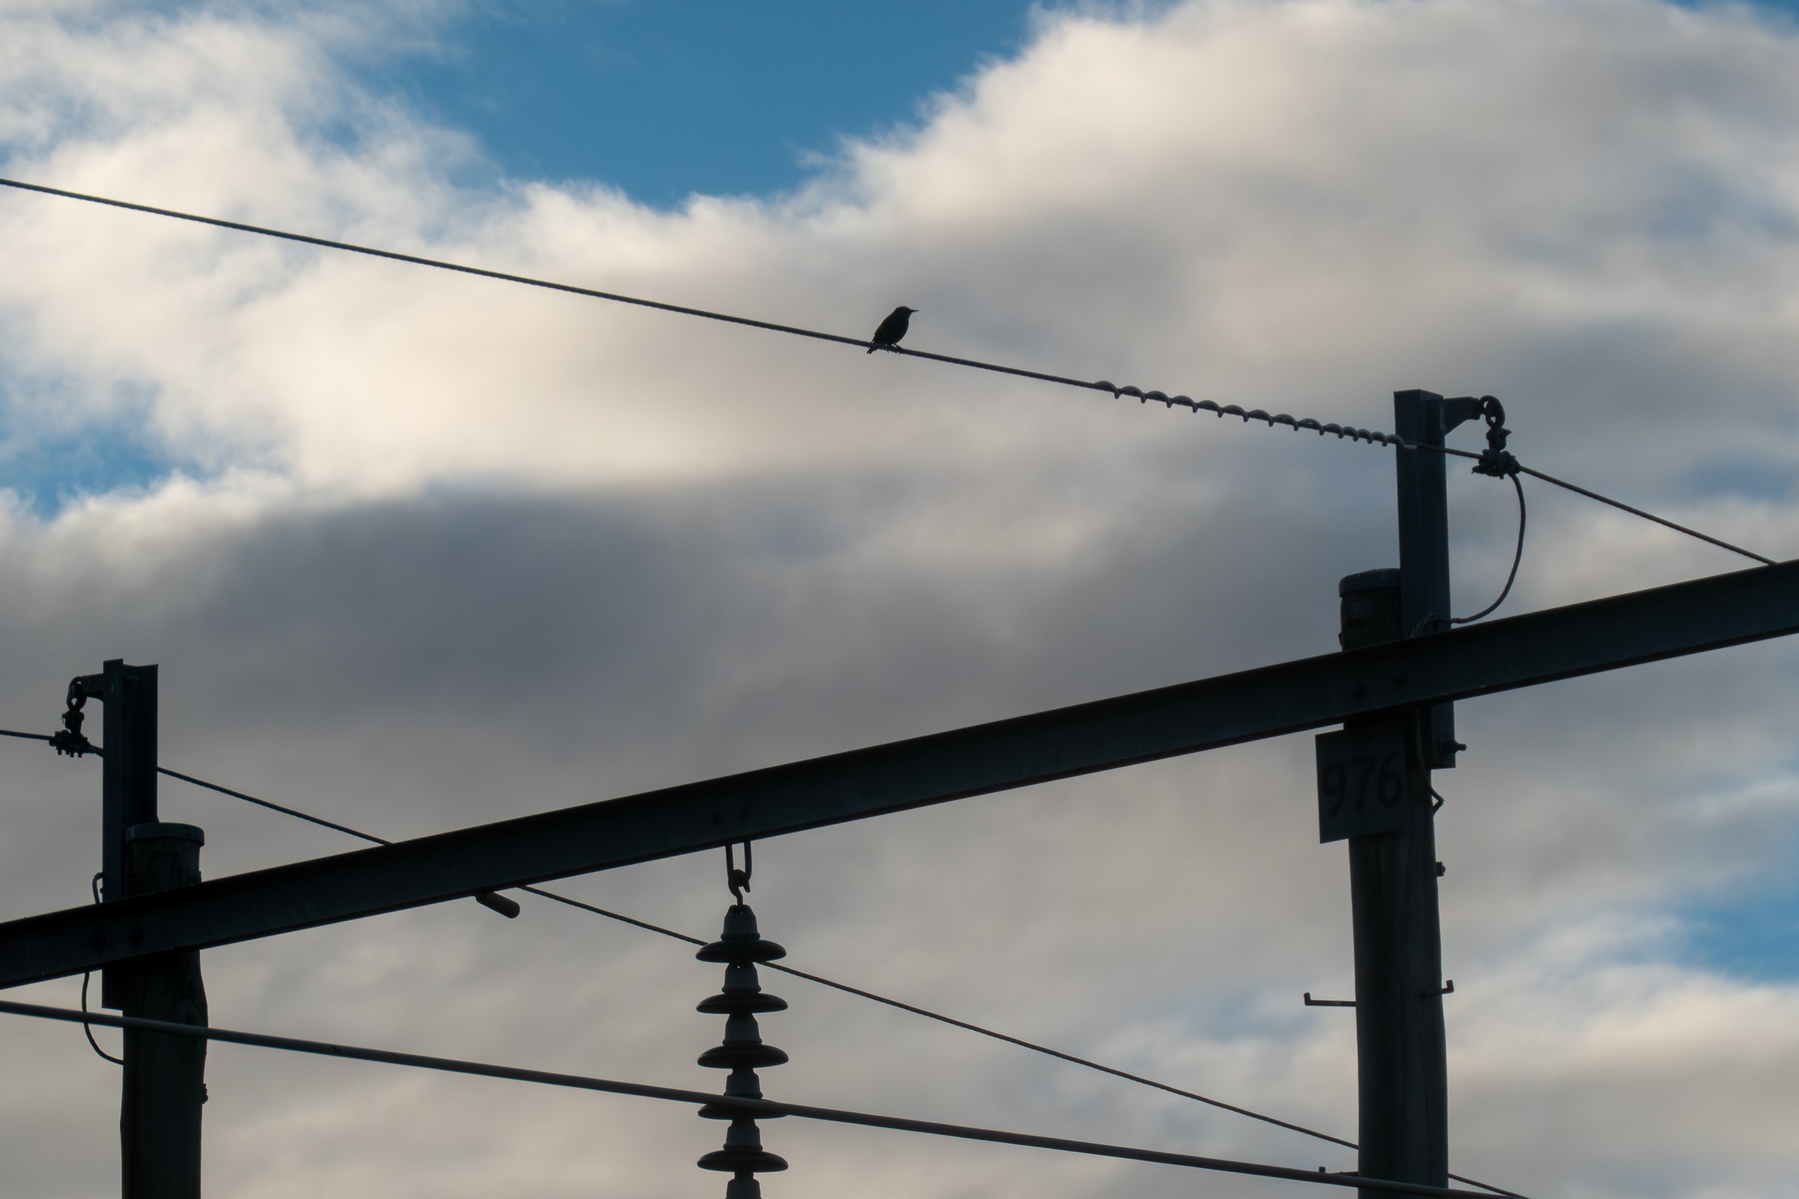 A silhouette of a single bird on a power line. Blue sky and white and grey clouds in the background.